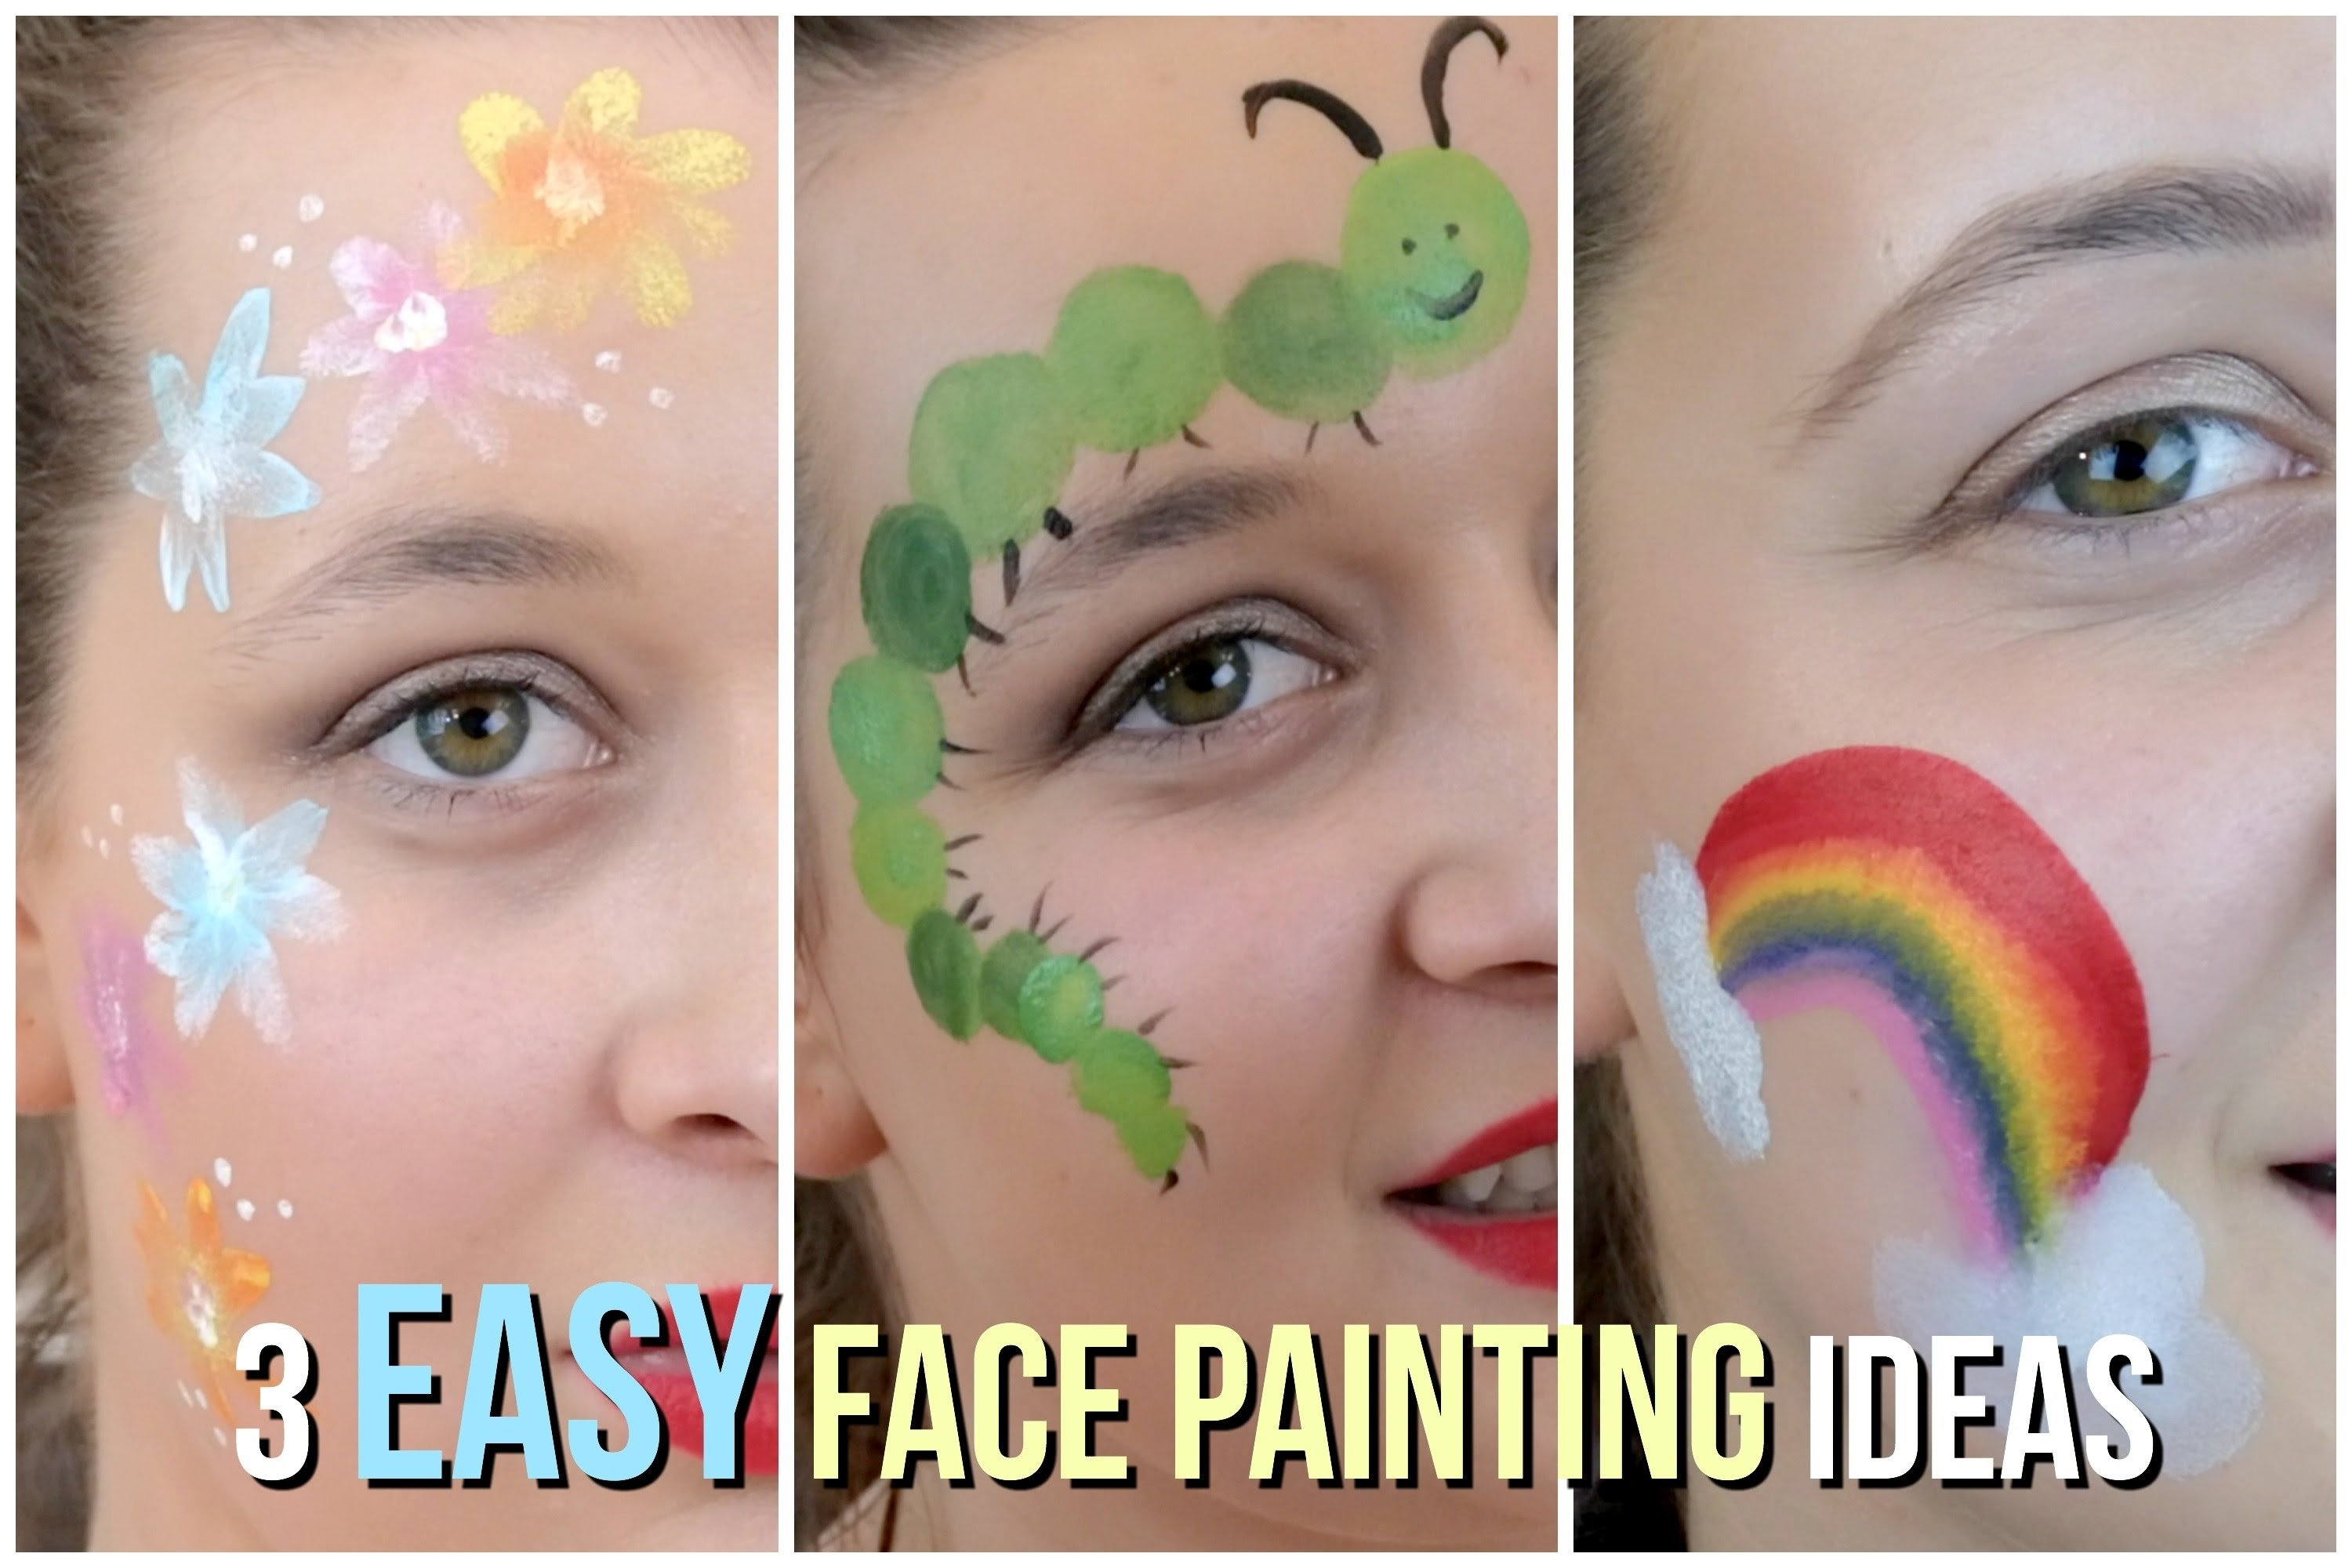 10 Best Easy Face Painting Ideas For Cheeks 3 easy face painting ideas that your kids will love youtube 7 2022